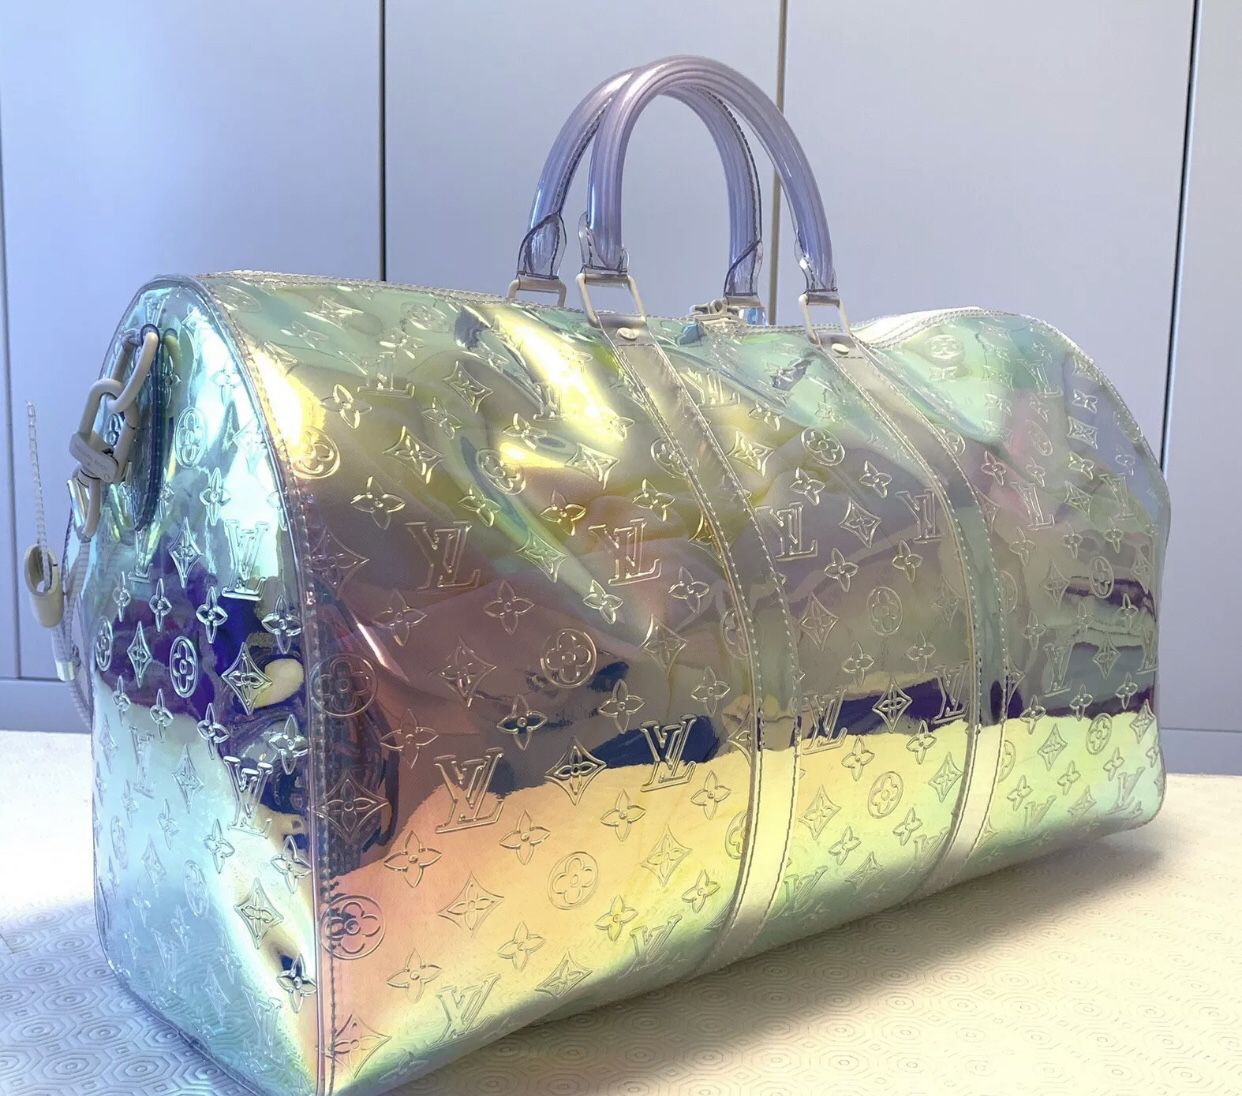 Louis Vuitton Keepall Prism Bag - 6 For Sale on 1stDibs